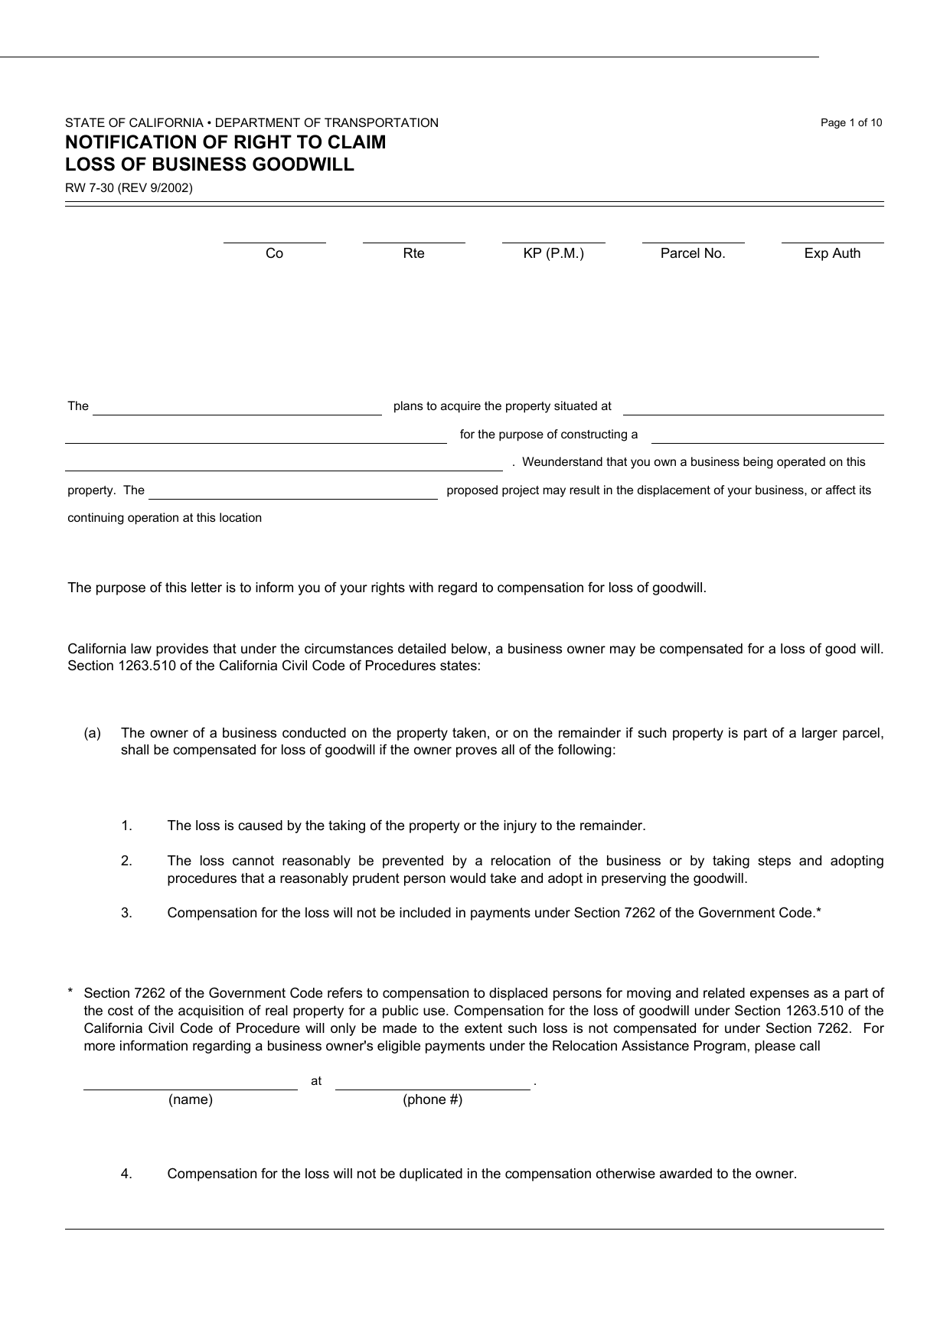 Form RW7-30 Notification of Right to Claim Loss of Business Goodwill - California, Page 1